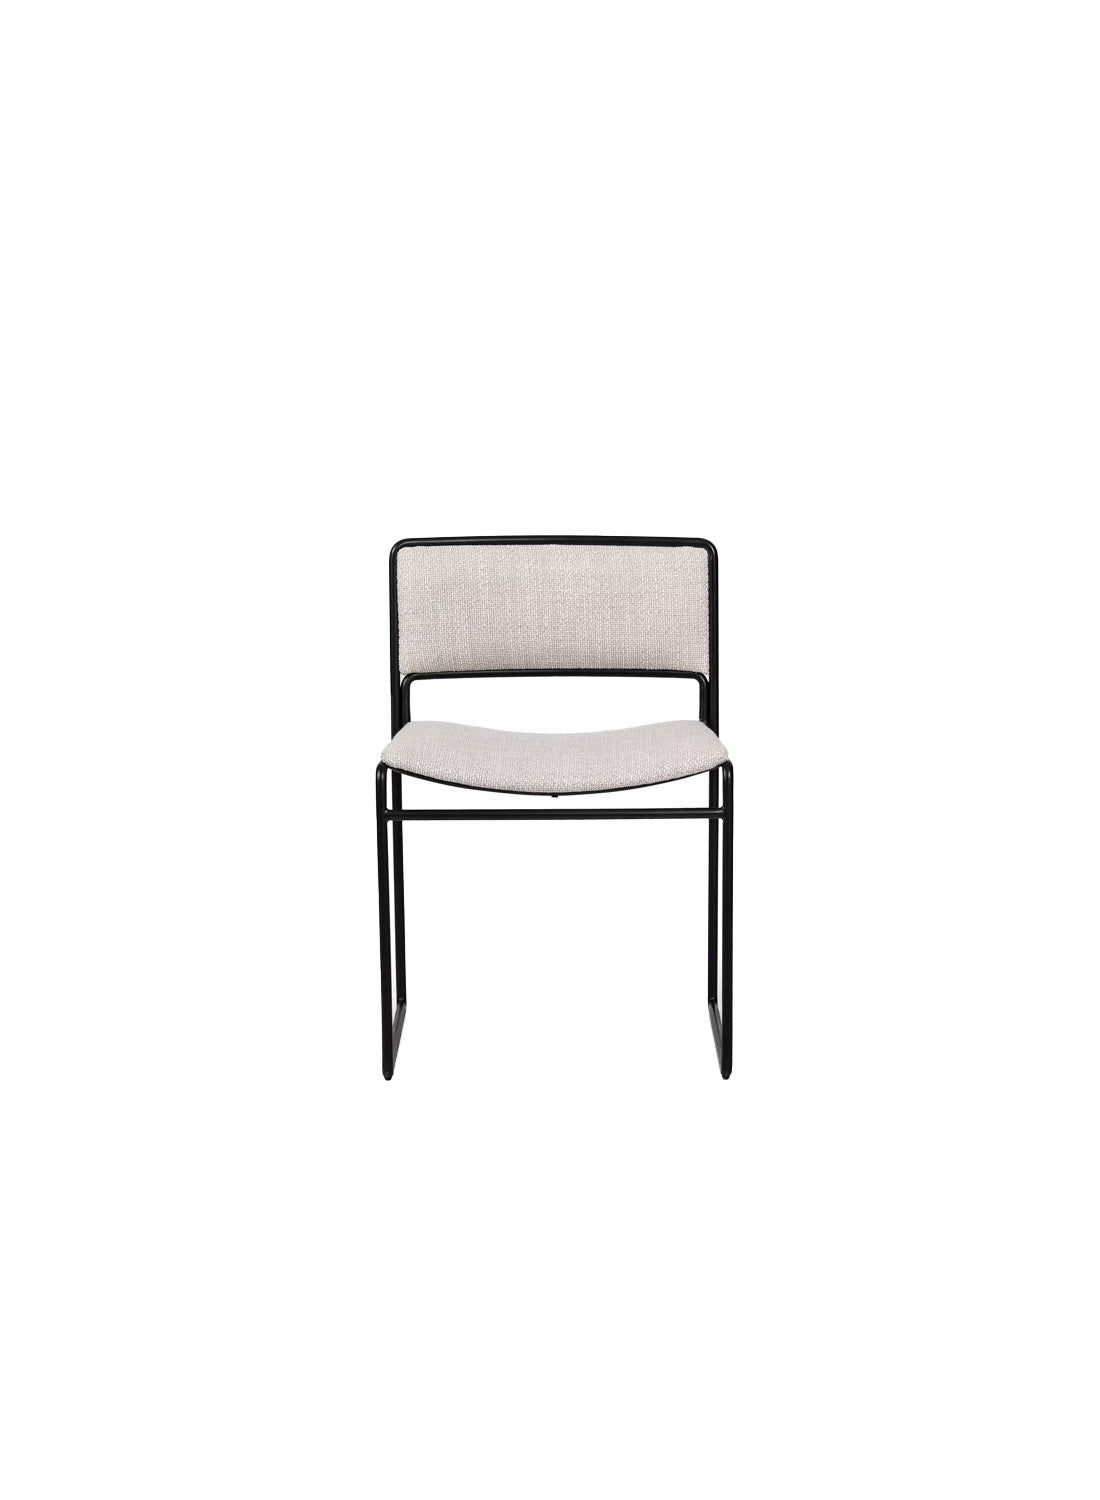 Four Hands Donato Dining Chair, Gibson Wheat